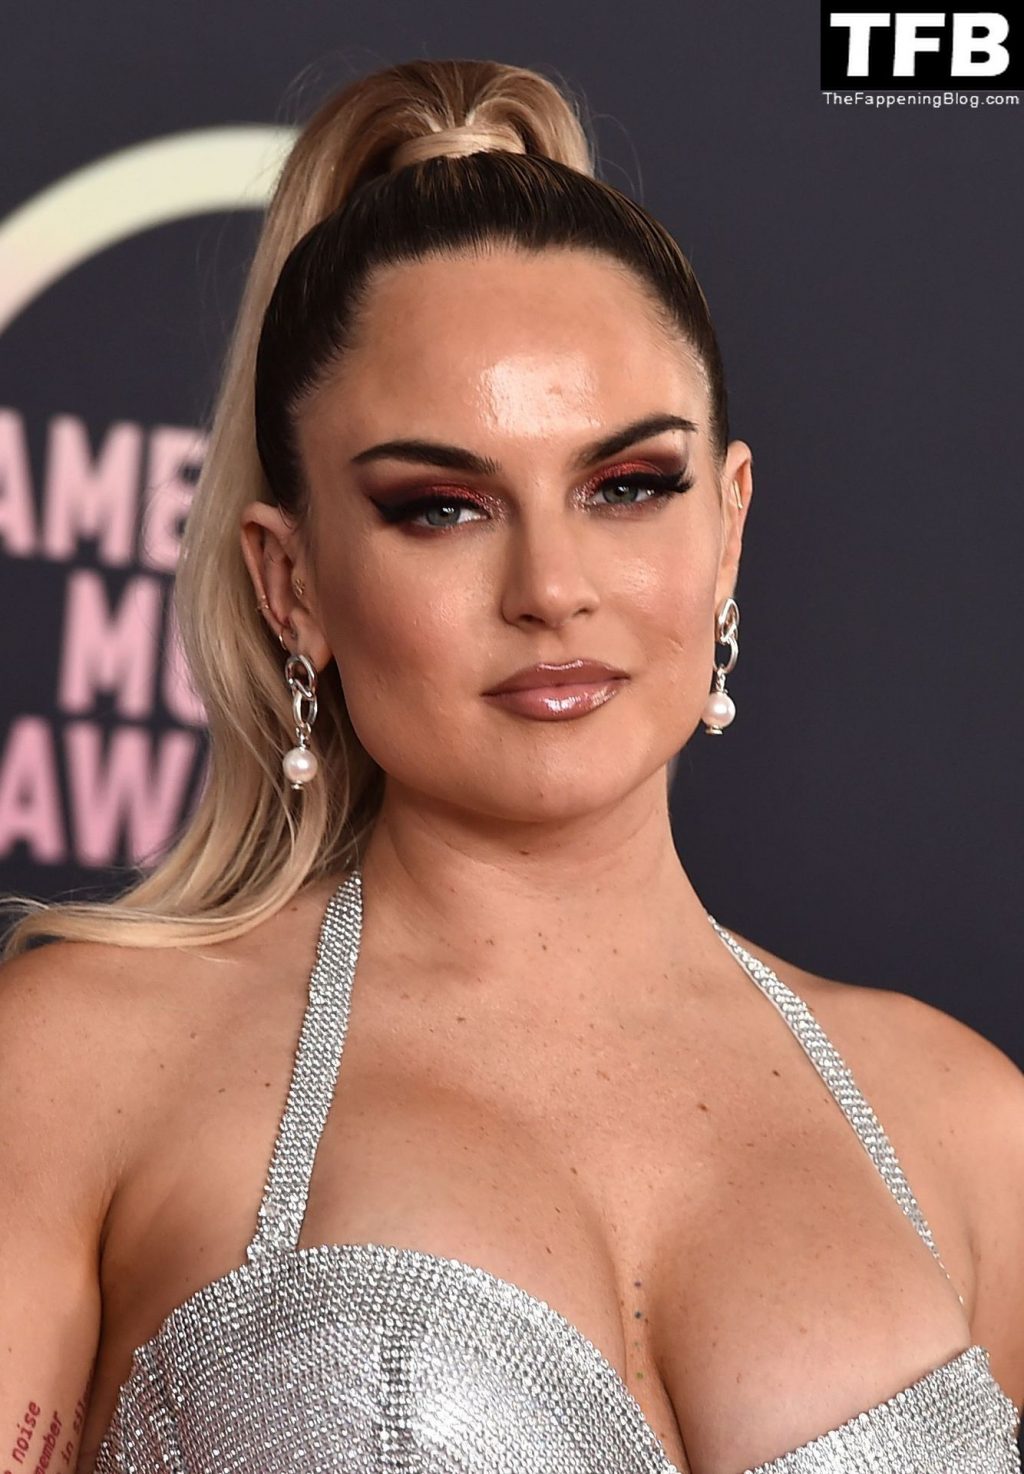 JoJo Teases Her Boobs and Music at the 2021 American Music Awards (42 Photos)